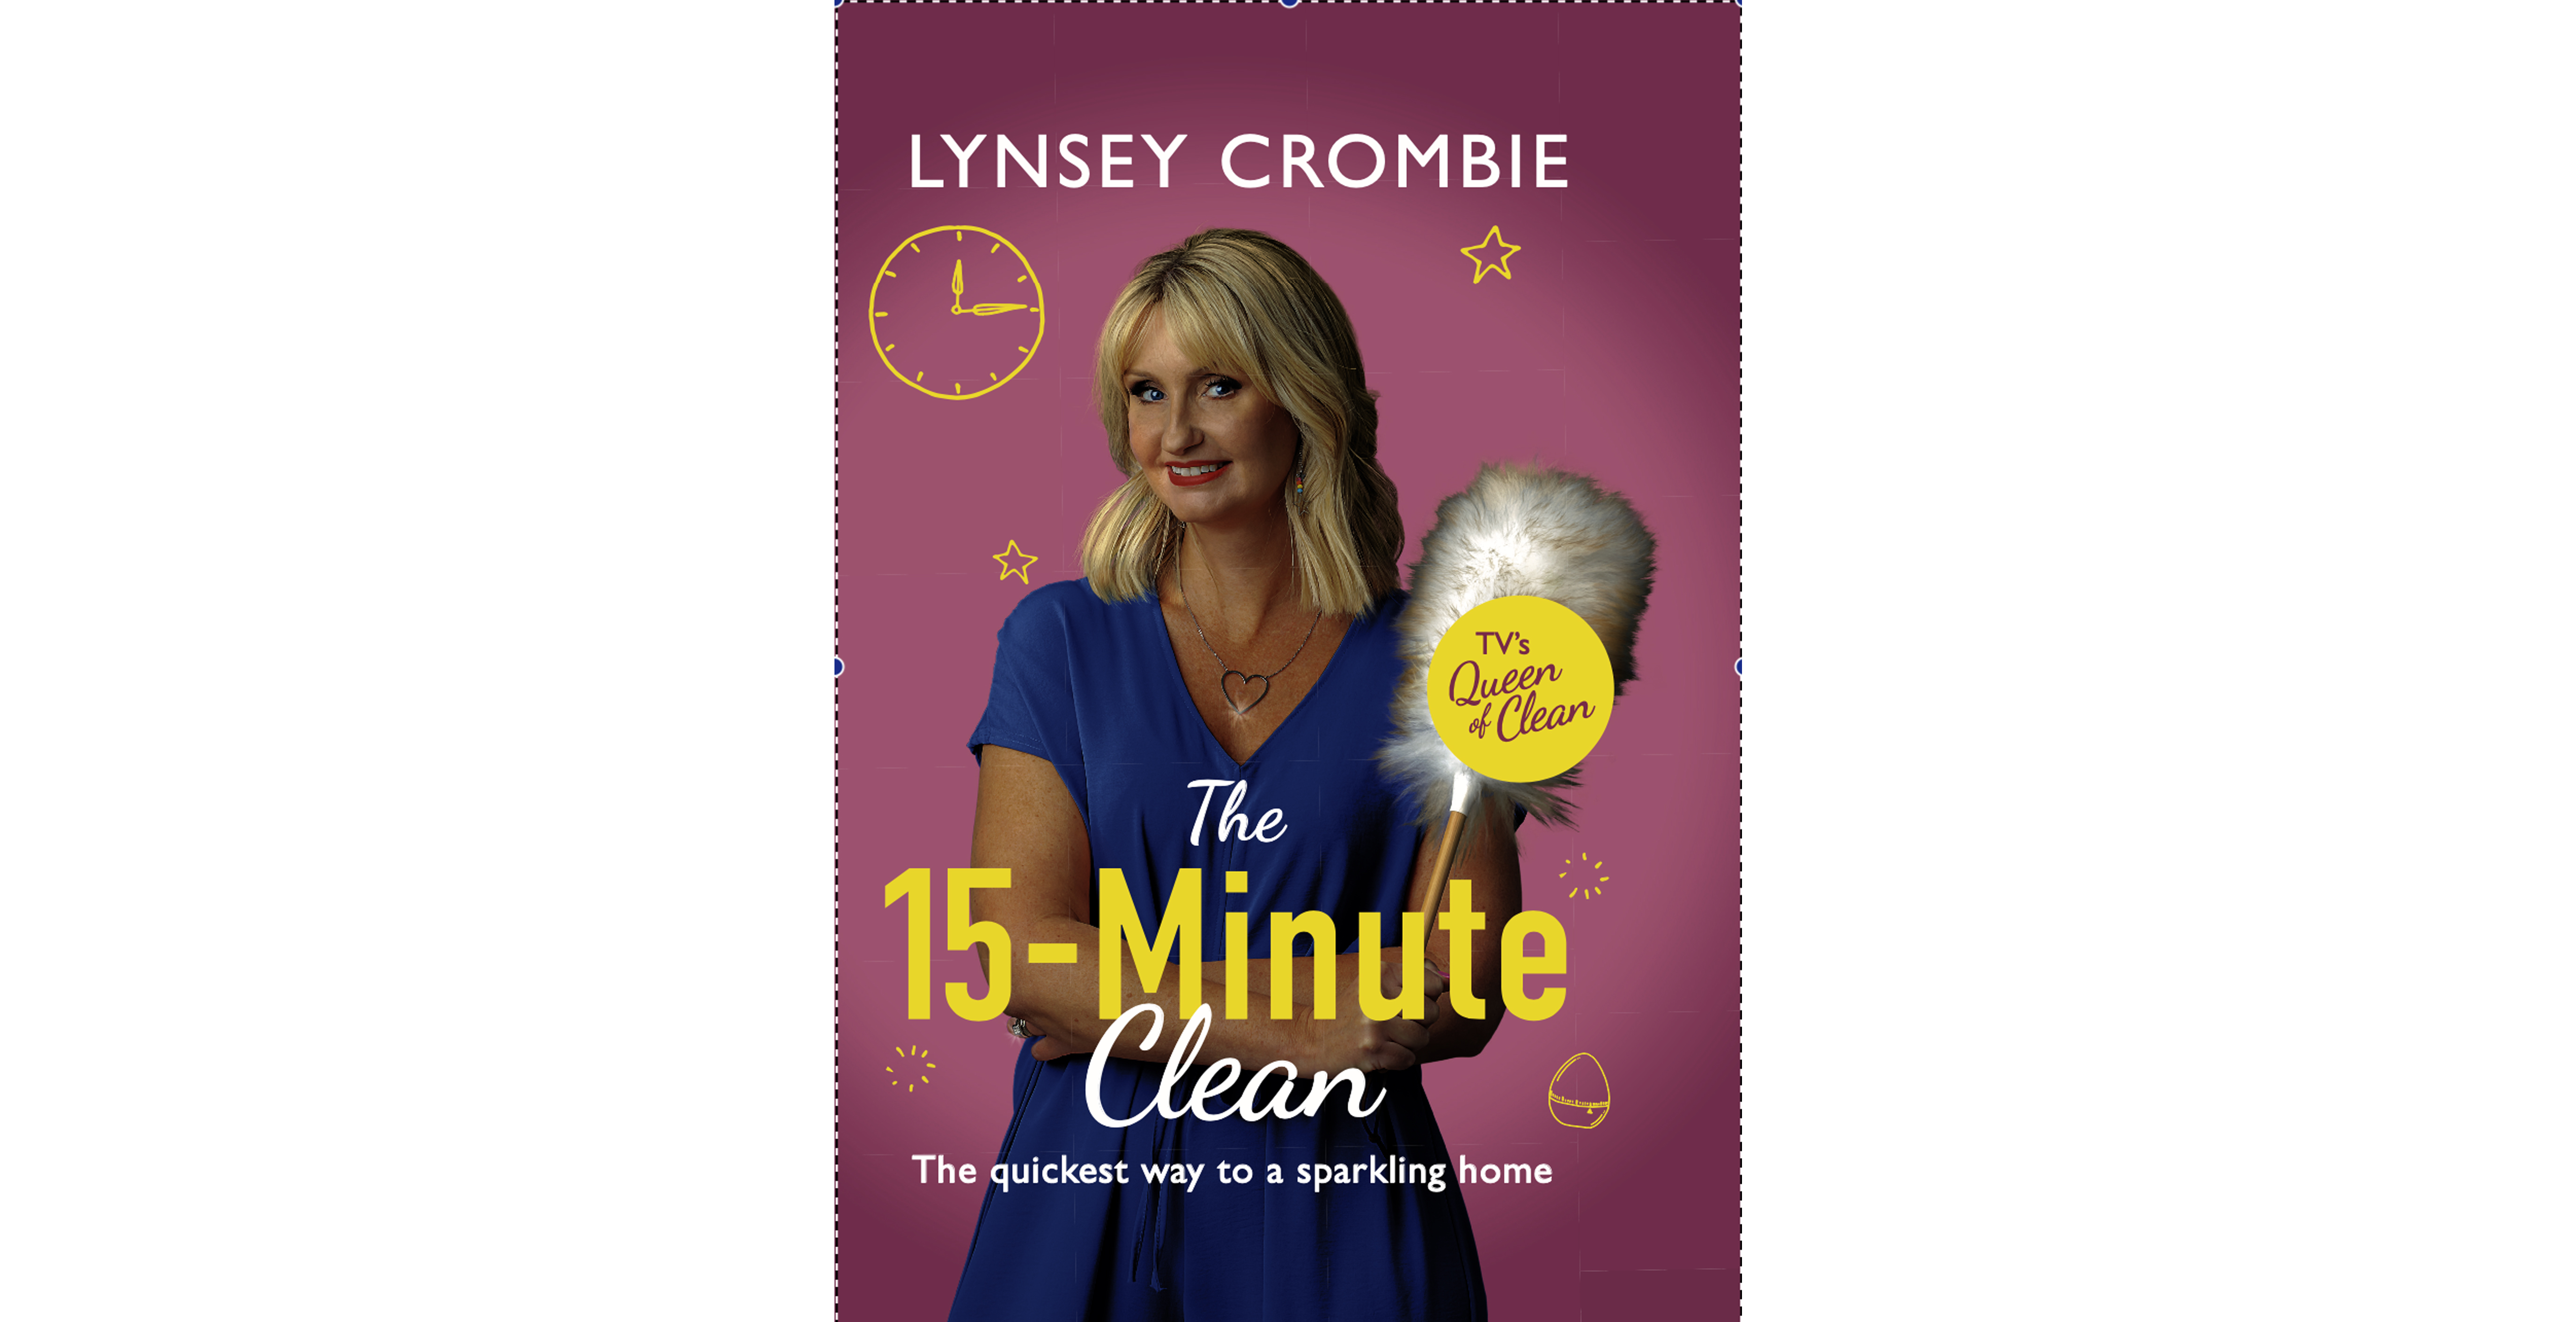 15 Minute Clean book by Lynsey Crombie